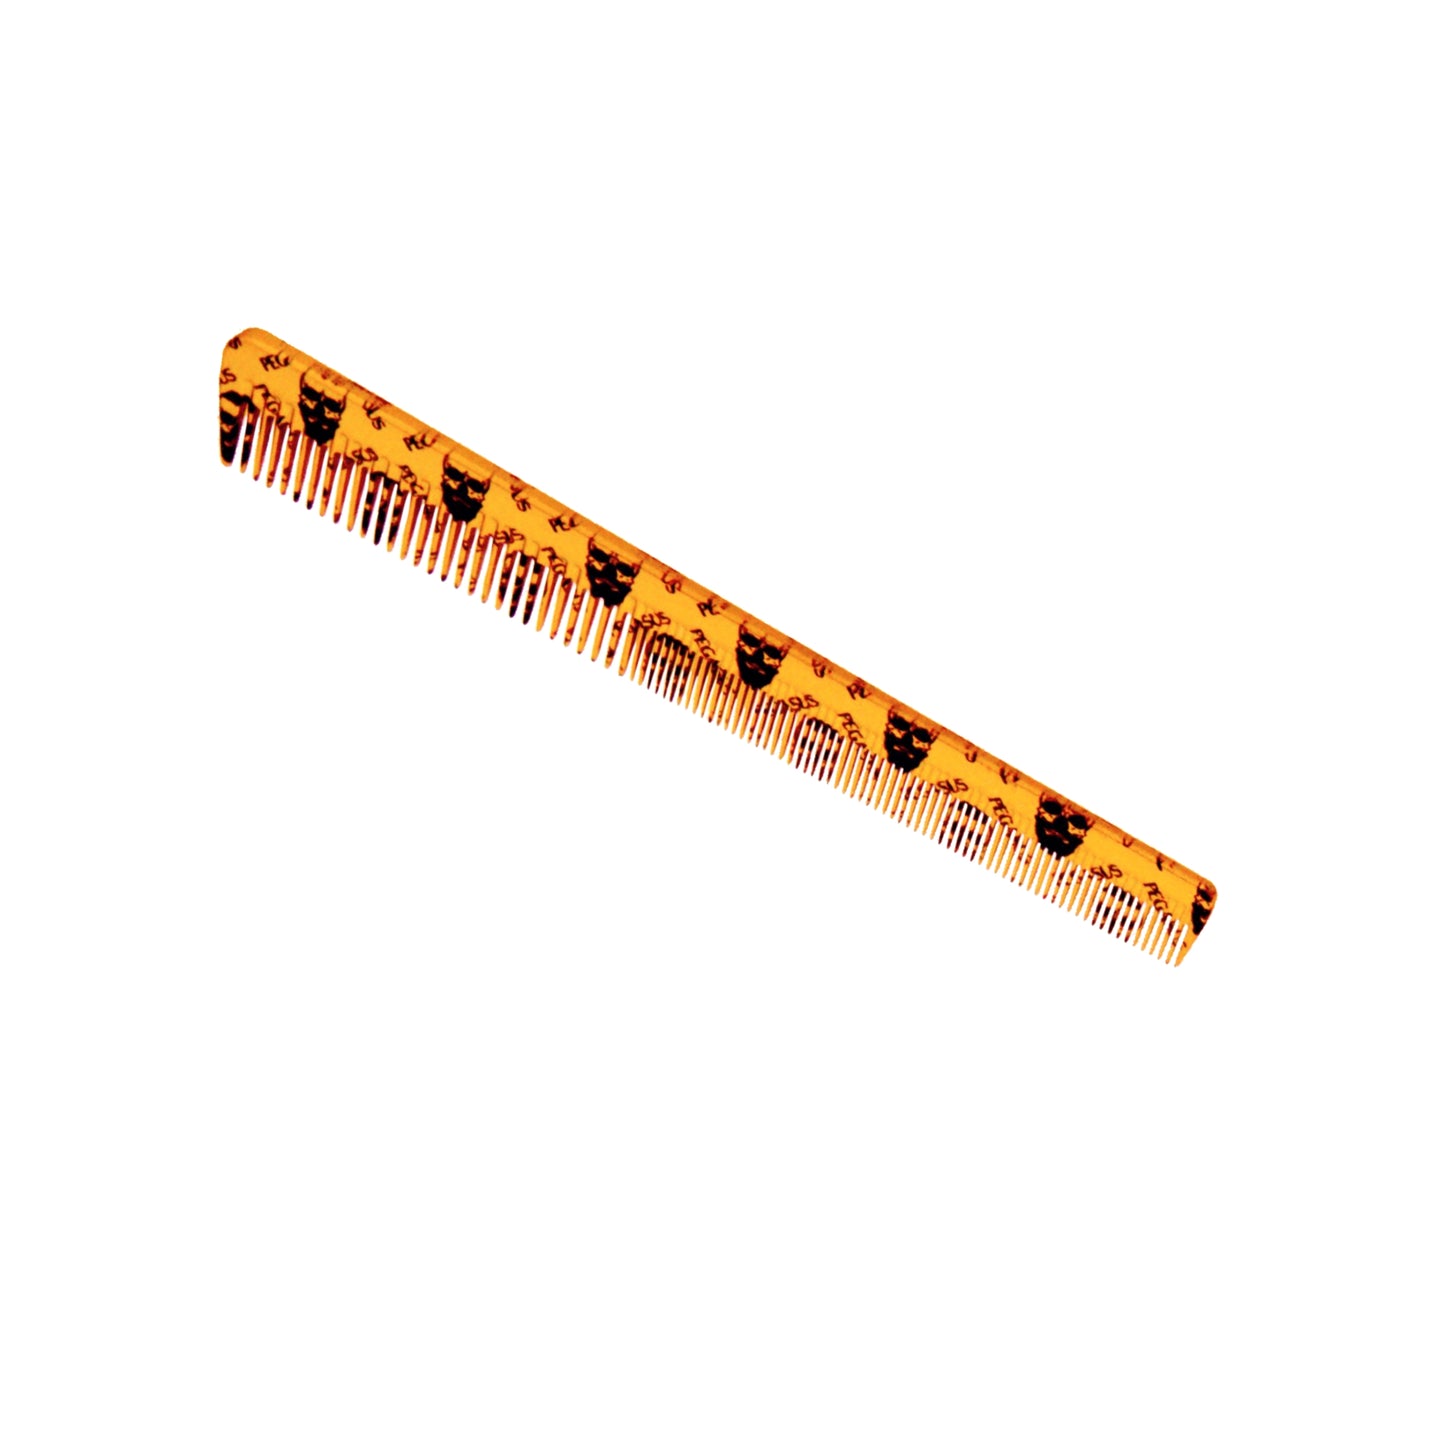 Pegasus Skulleto 303, 6.5in Hard Rubber Heavy Barber Comb, Handmade, Seamless, Smooth Edges, Anti Static, Heat and Chemically Resistant, Wet Hair, Everyday Grooming Comb | Peines de goma dura - Gold